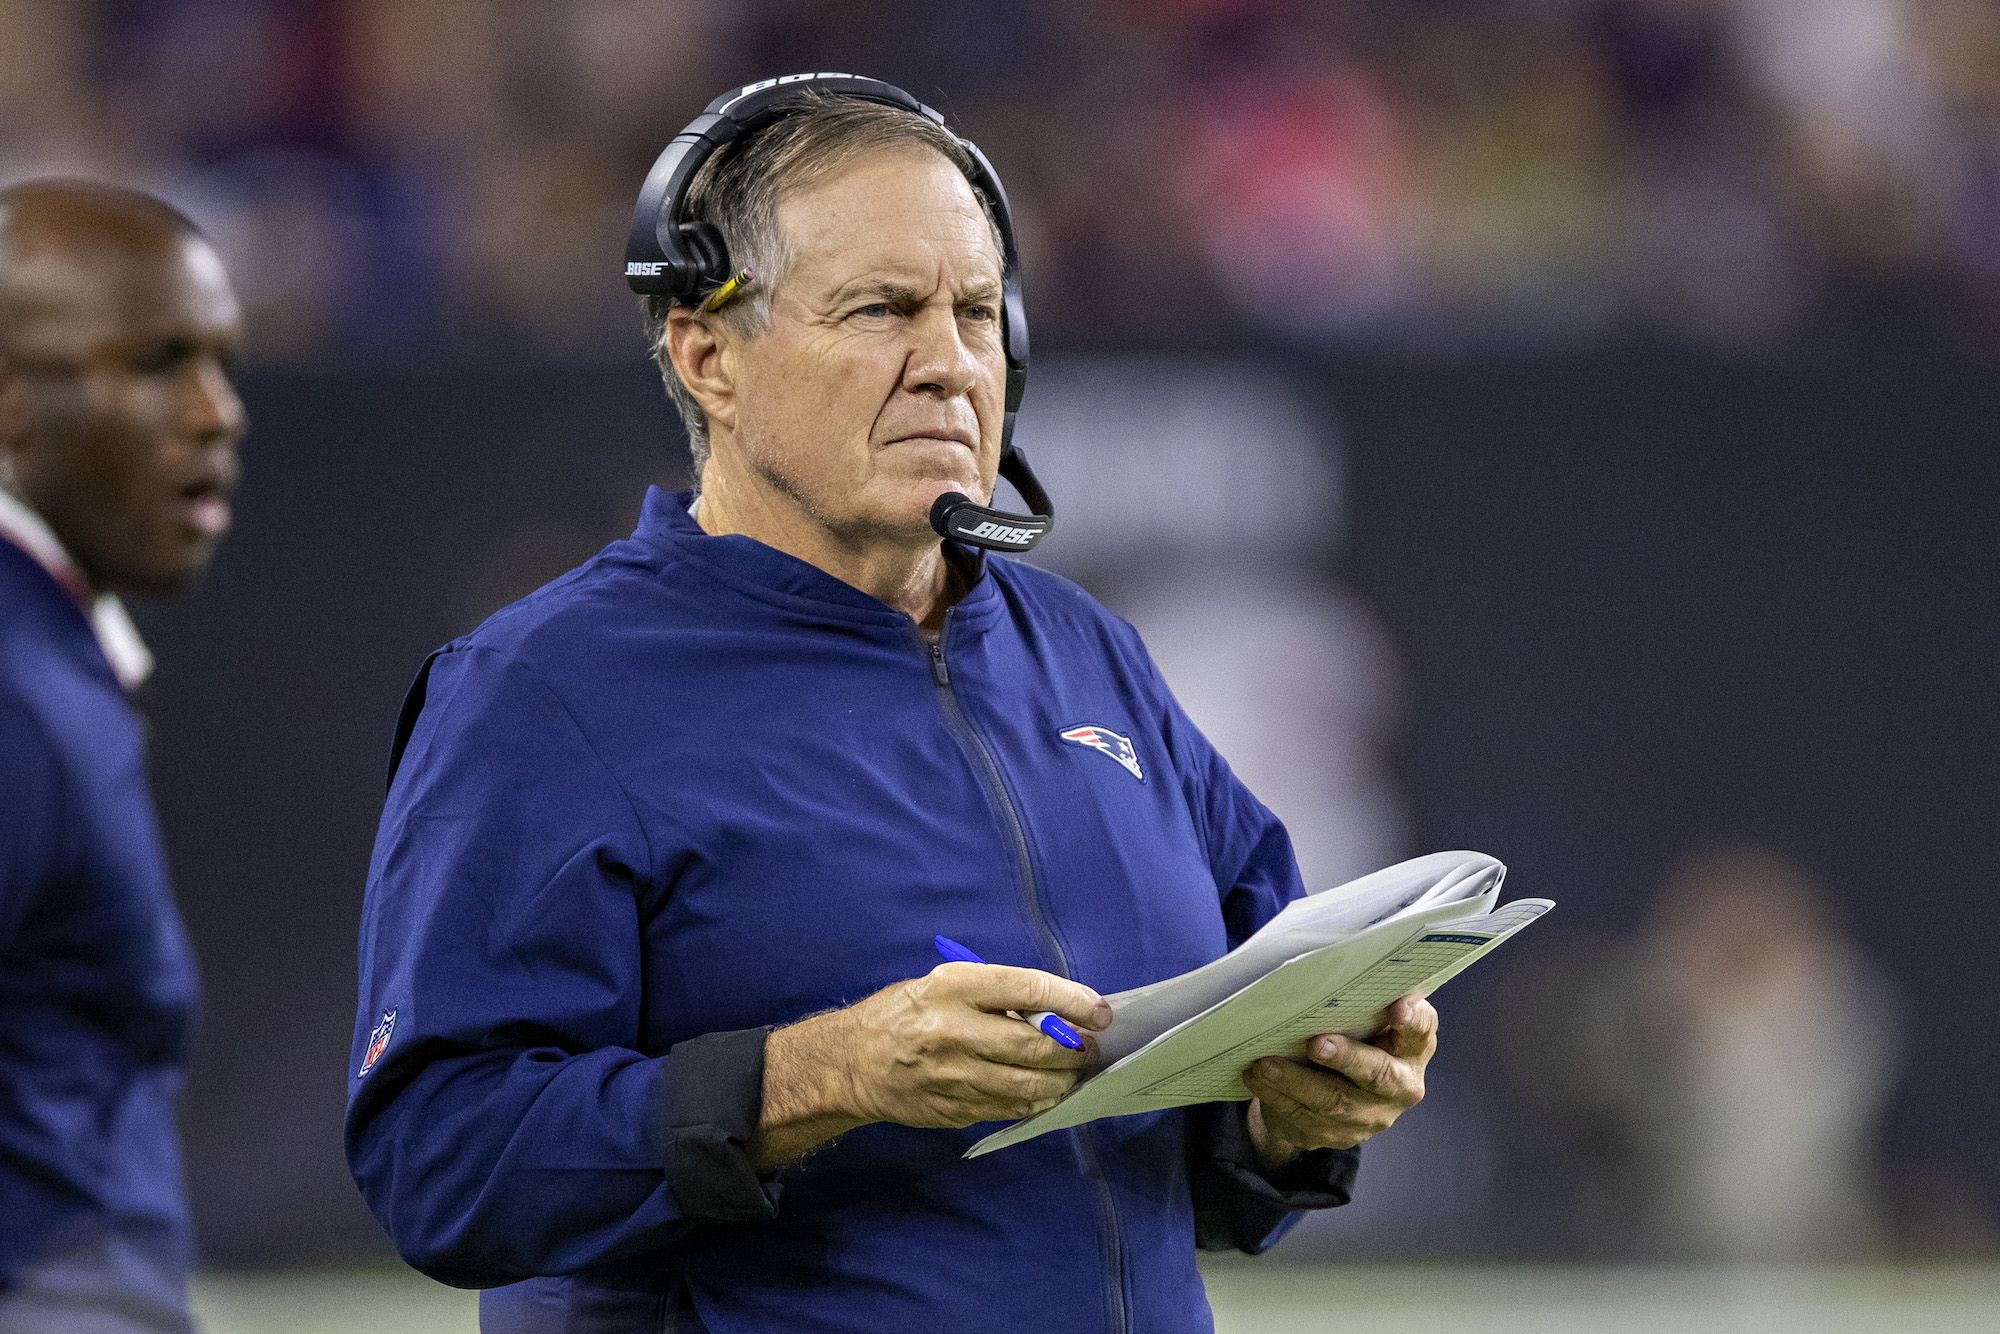 Bill Belichick is already entering the 2020 NFL season without Tom Brady; now, he'll have a limited preseason roster.